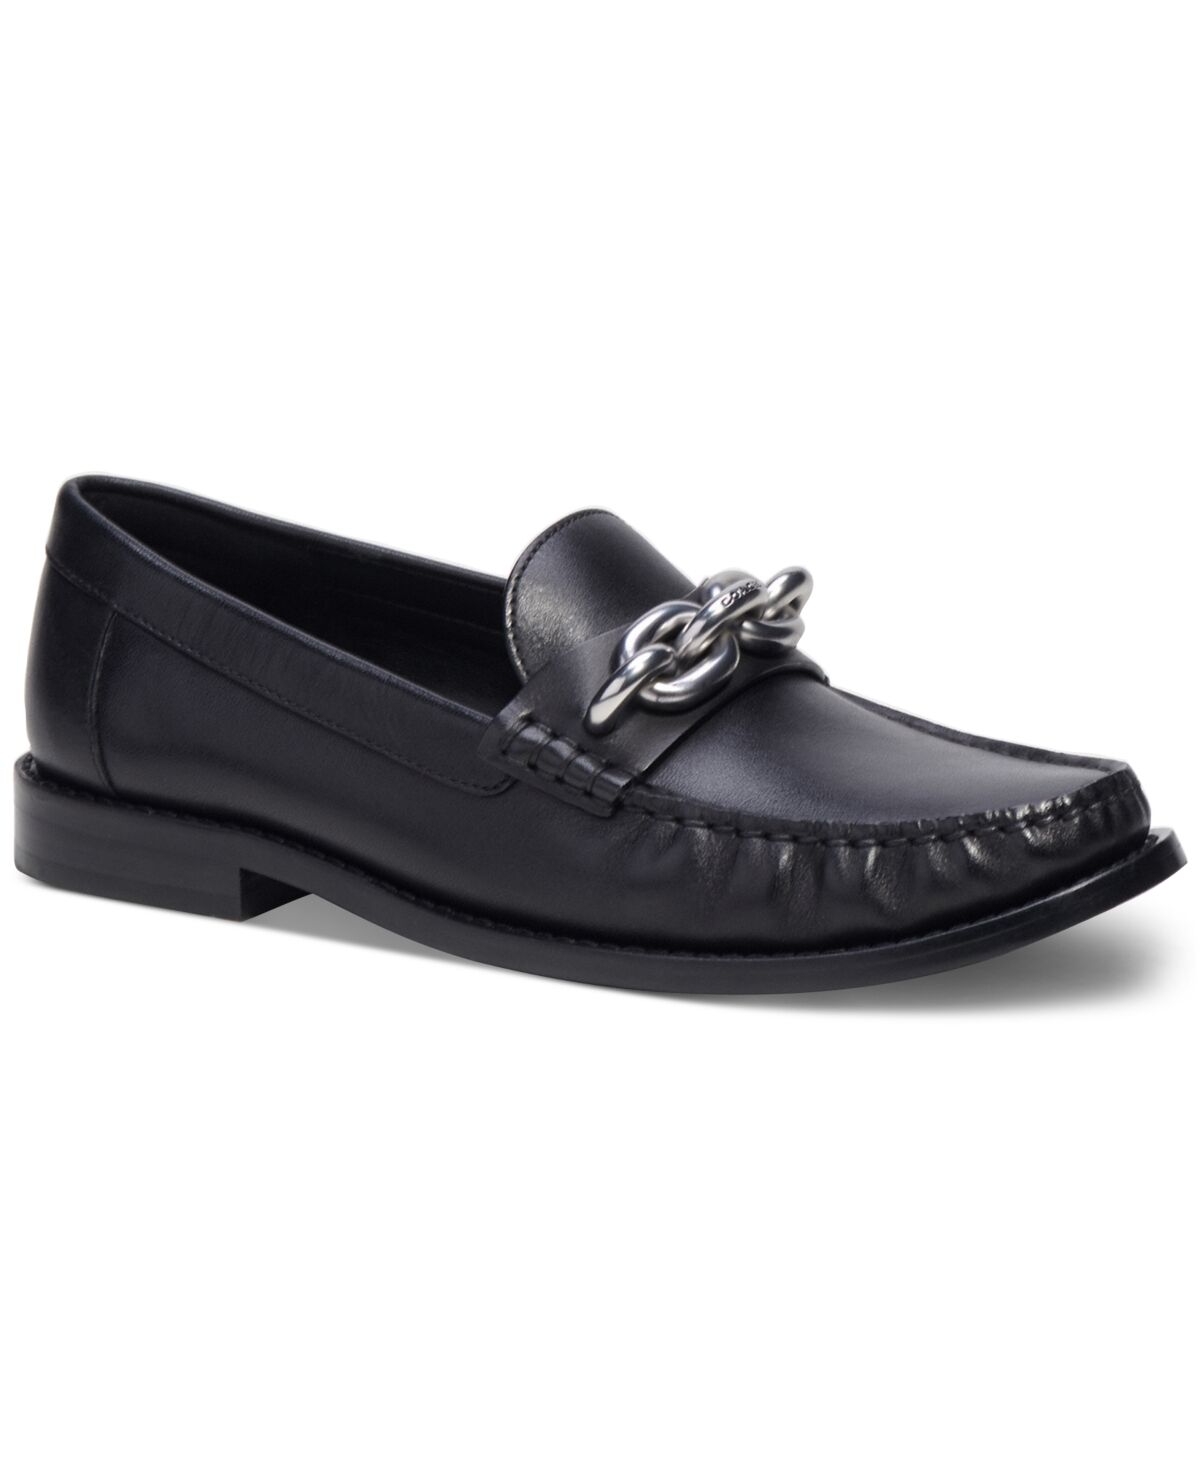 Coach Women's Jess Chain-Strap Moccasin Loafers - Black/ Silver Leather